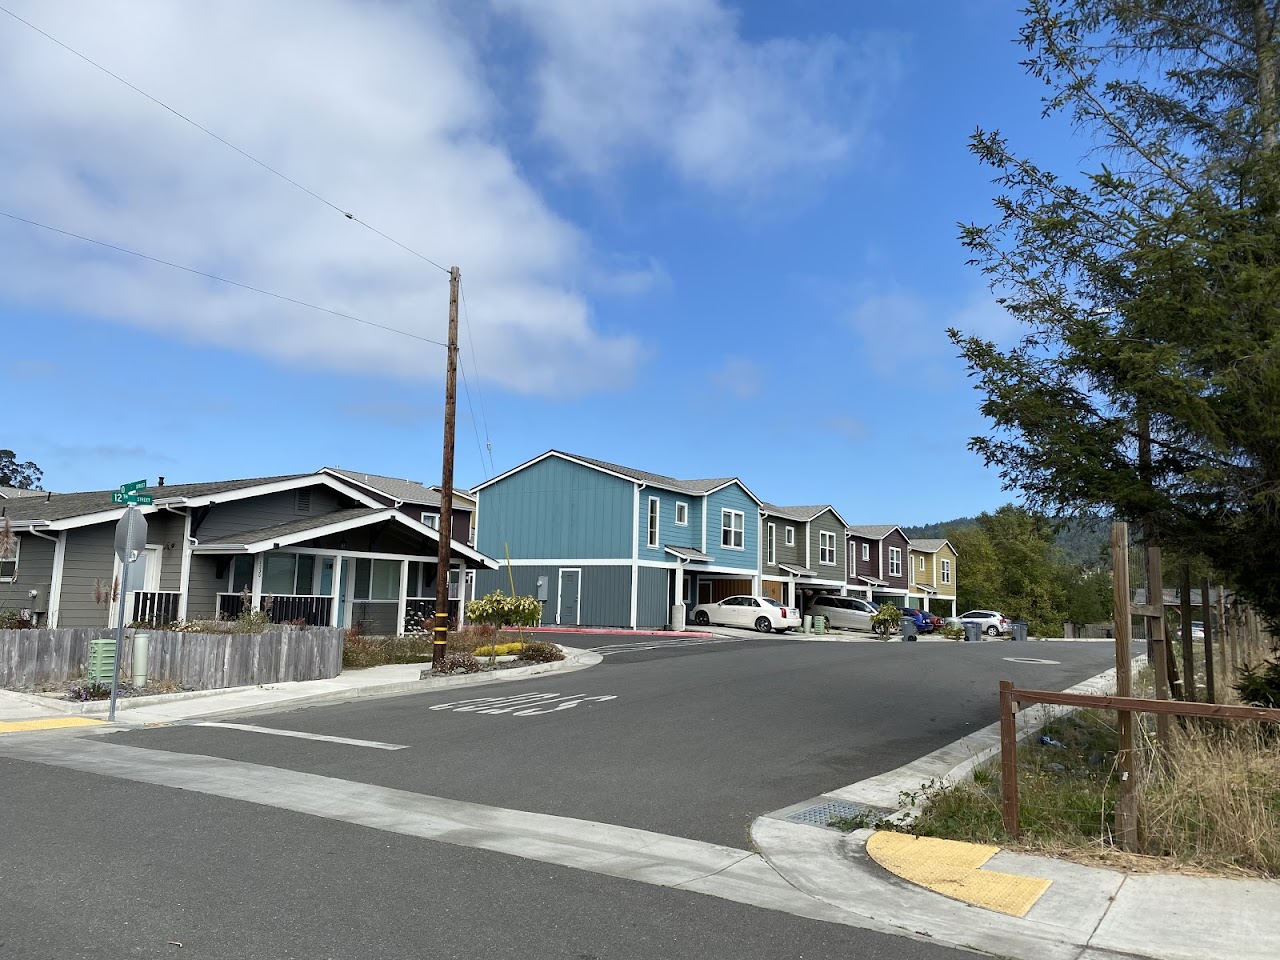 Photo of CREAMERY ROW TOWNHOMES. Affordable housing located at 1485 CREAMERY ALLEY ARCATA, CA 95521